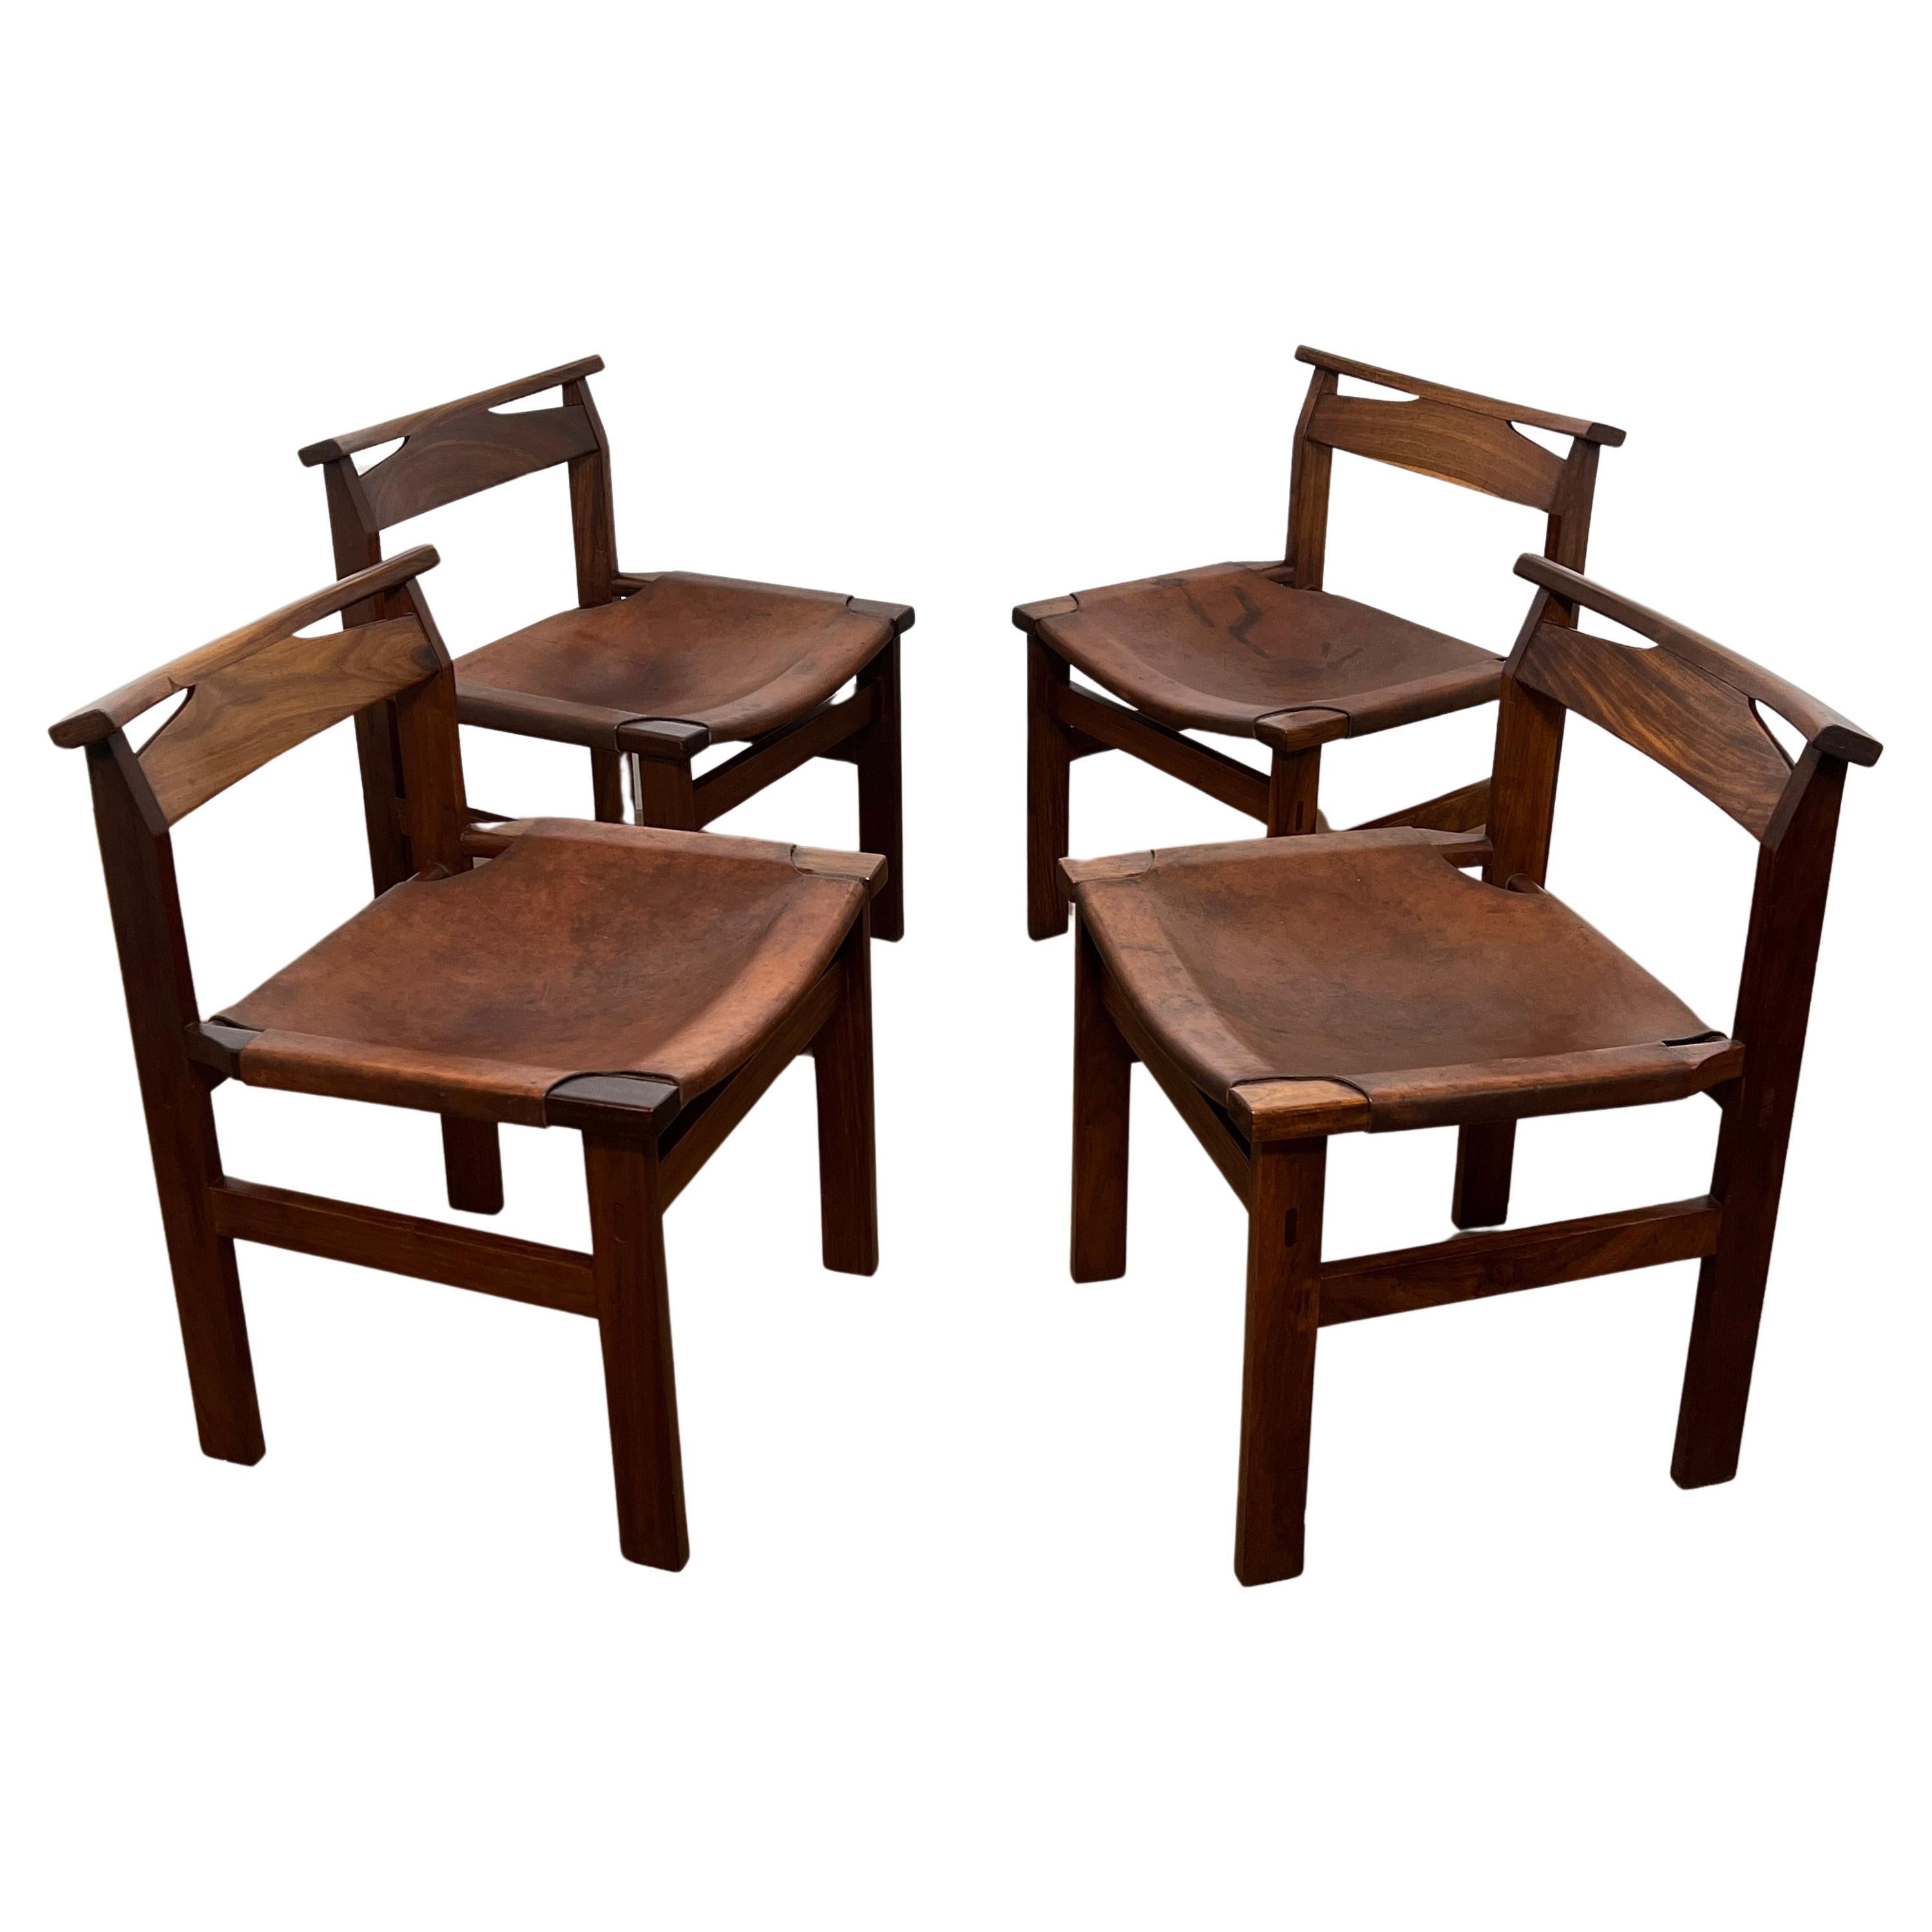 Set of Four John Tabraham for Kallenbach Dining Chairs, South Africa Ca. 1960s